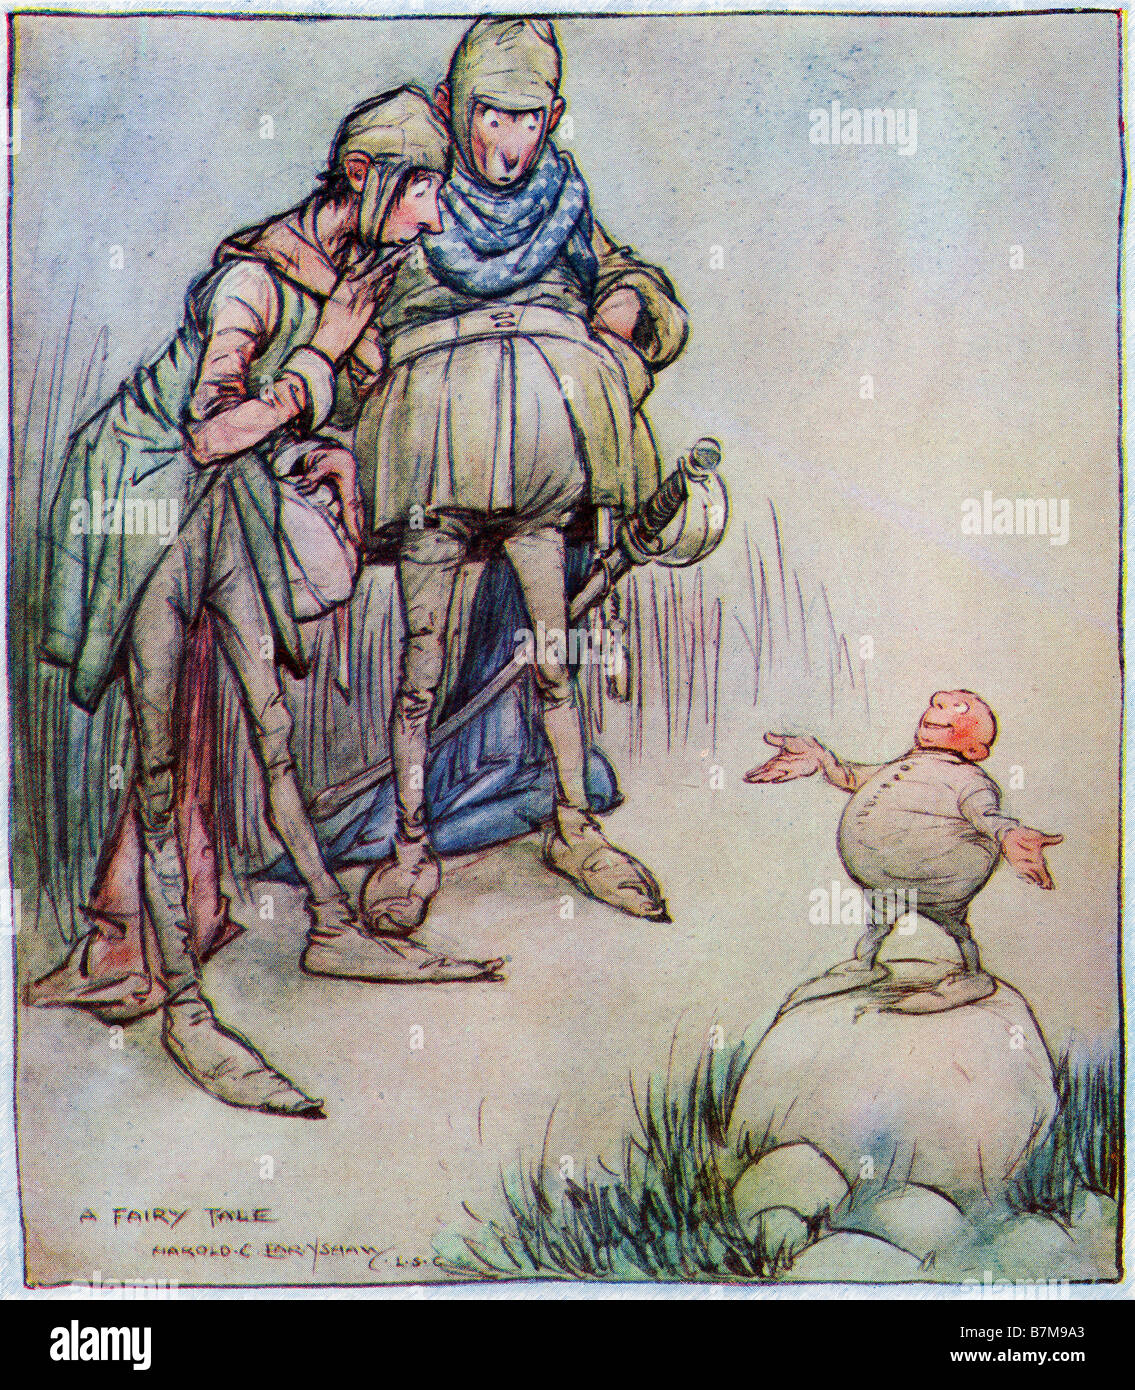 A Fairy Tale.  From the picture by Harold C Earnshaw from the book Princess Marie Jose'ss Children s Book, published 1916 Stock Photo